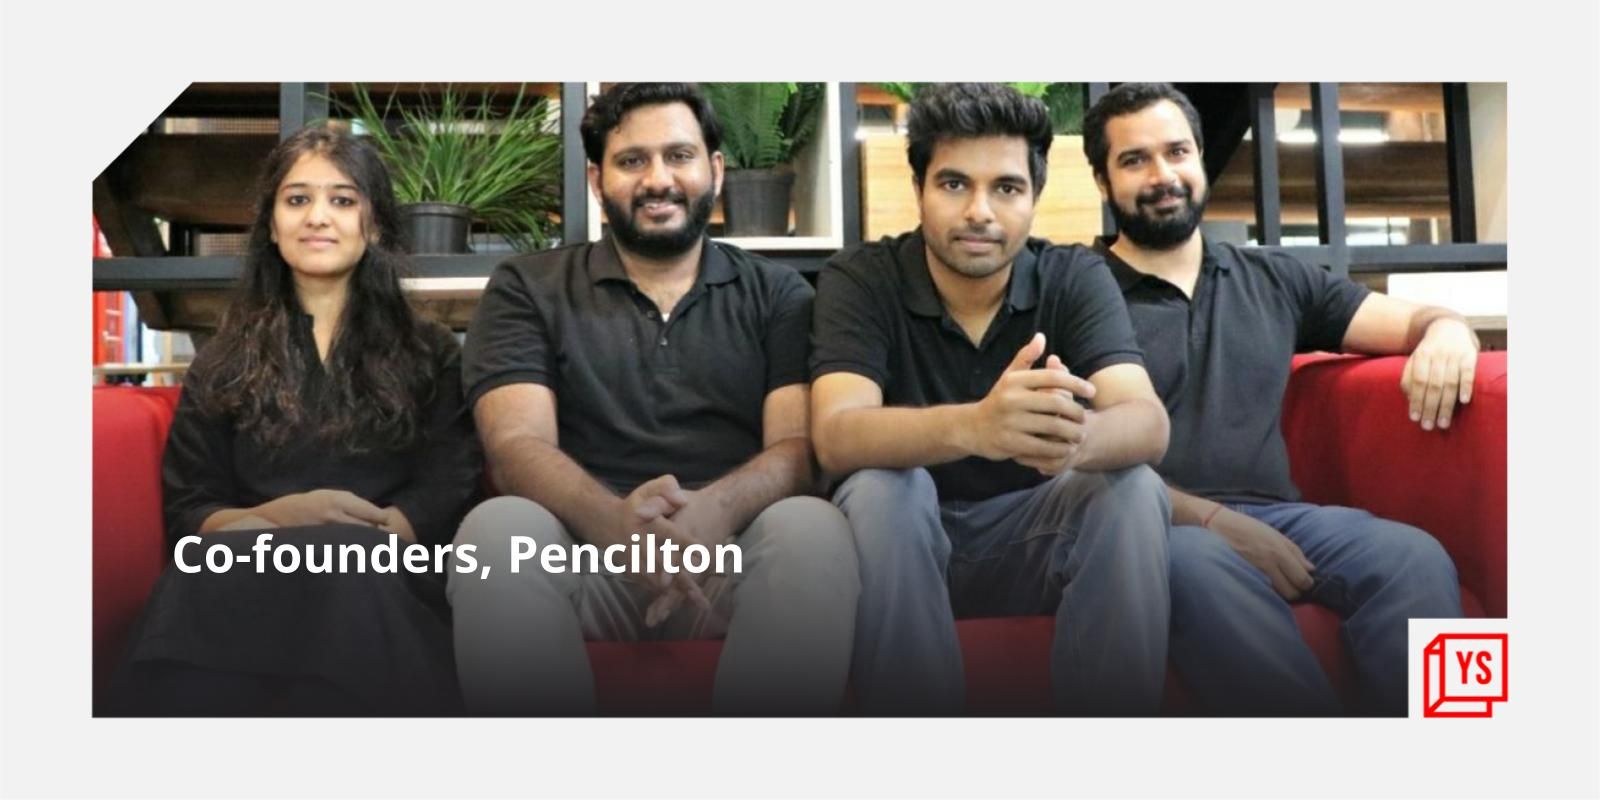 How Pencilton aims to disrupt the kids’ fintech space with contactless smart cards